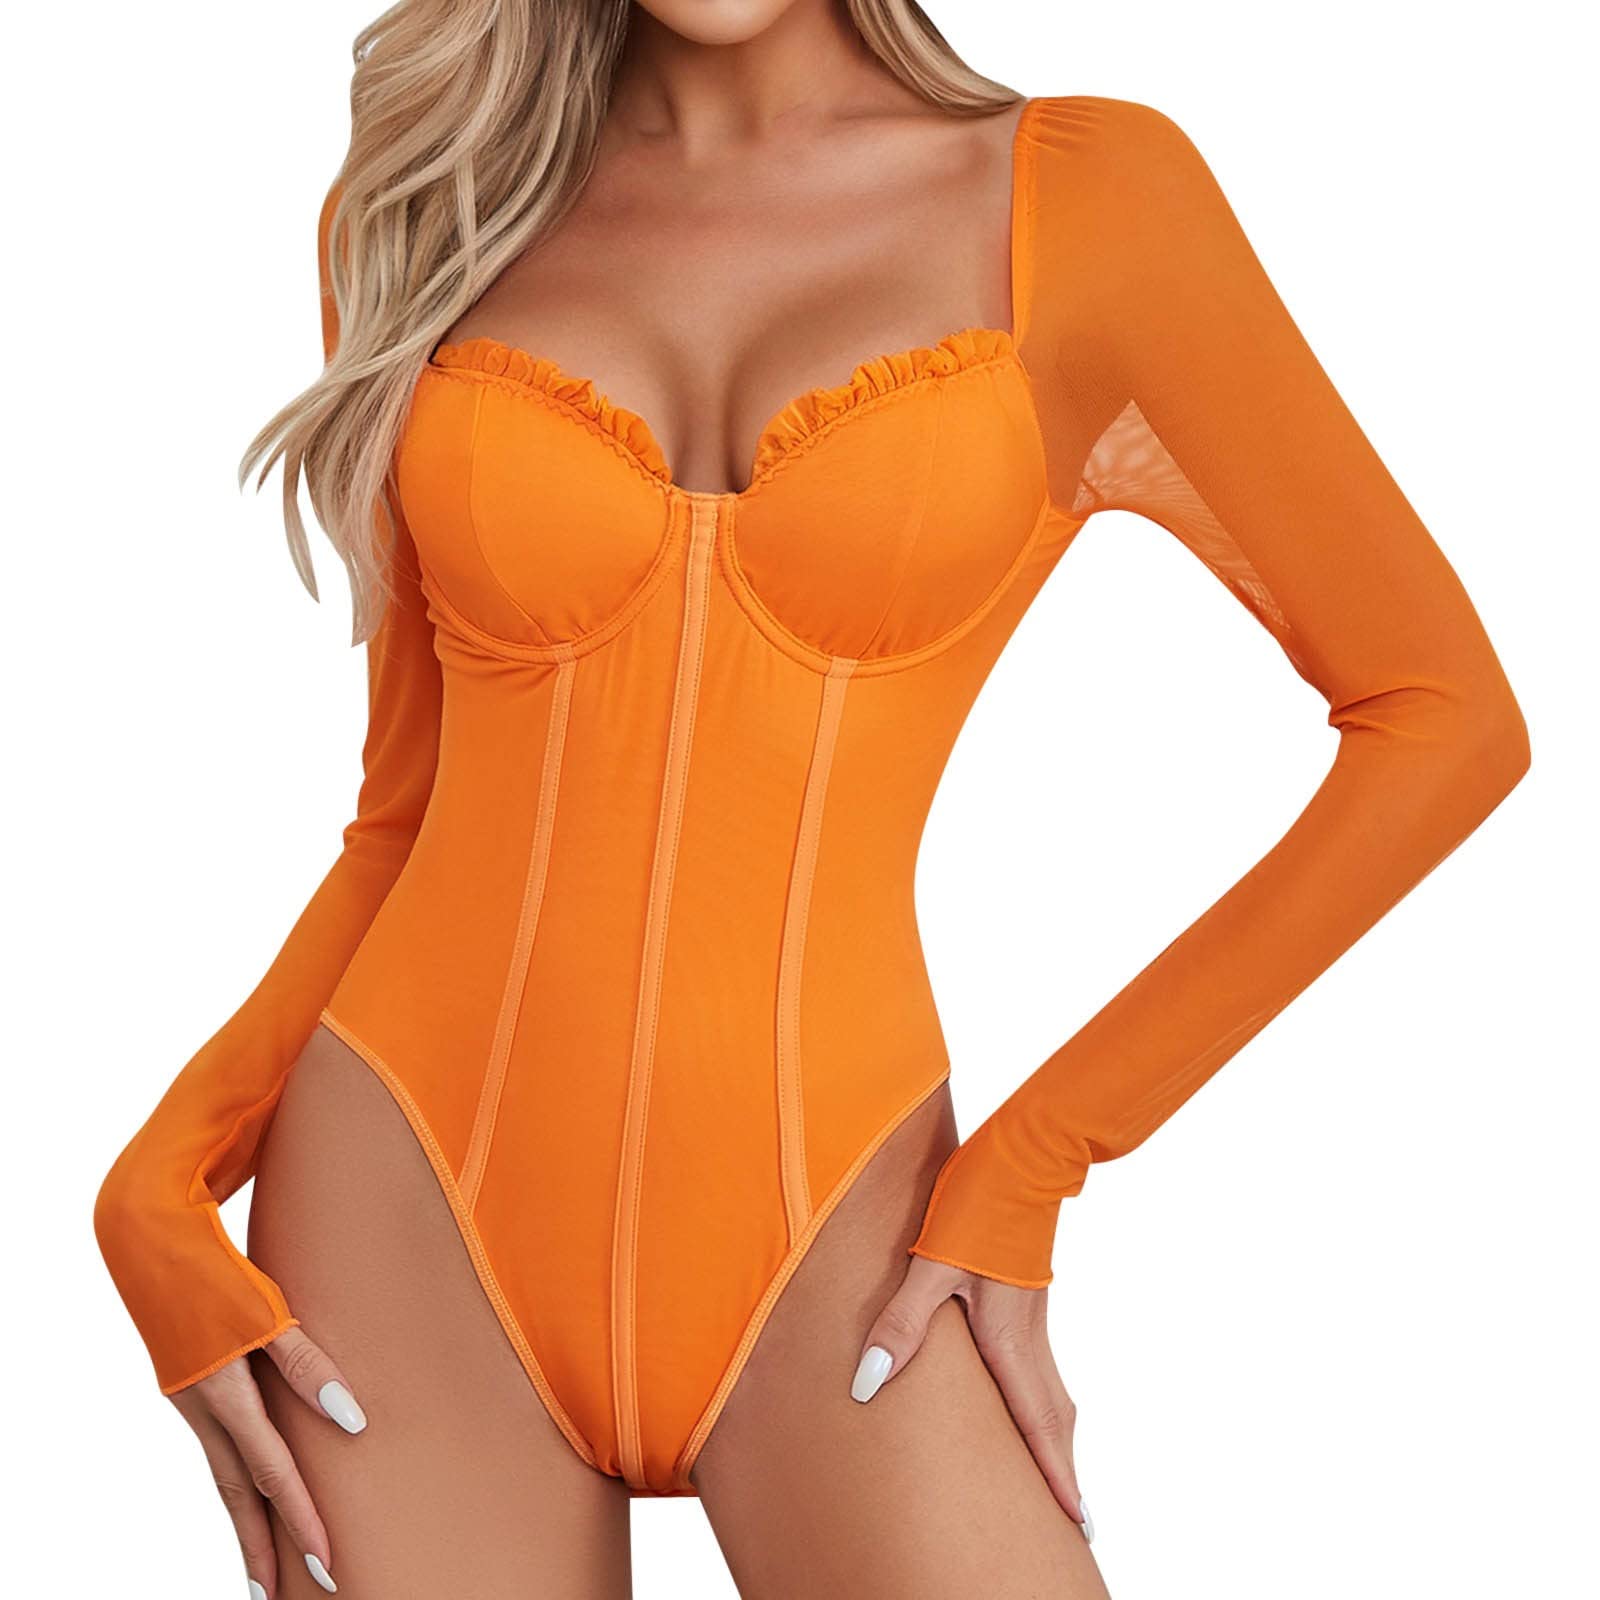 Sexy Lingerie For Women mesh long sleeve thong Bodysuit sweetheart neck  Teddy Bodysuits push up Body suits clubwear